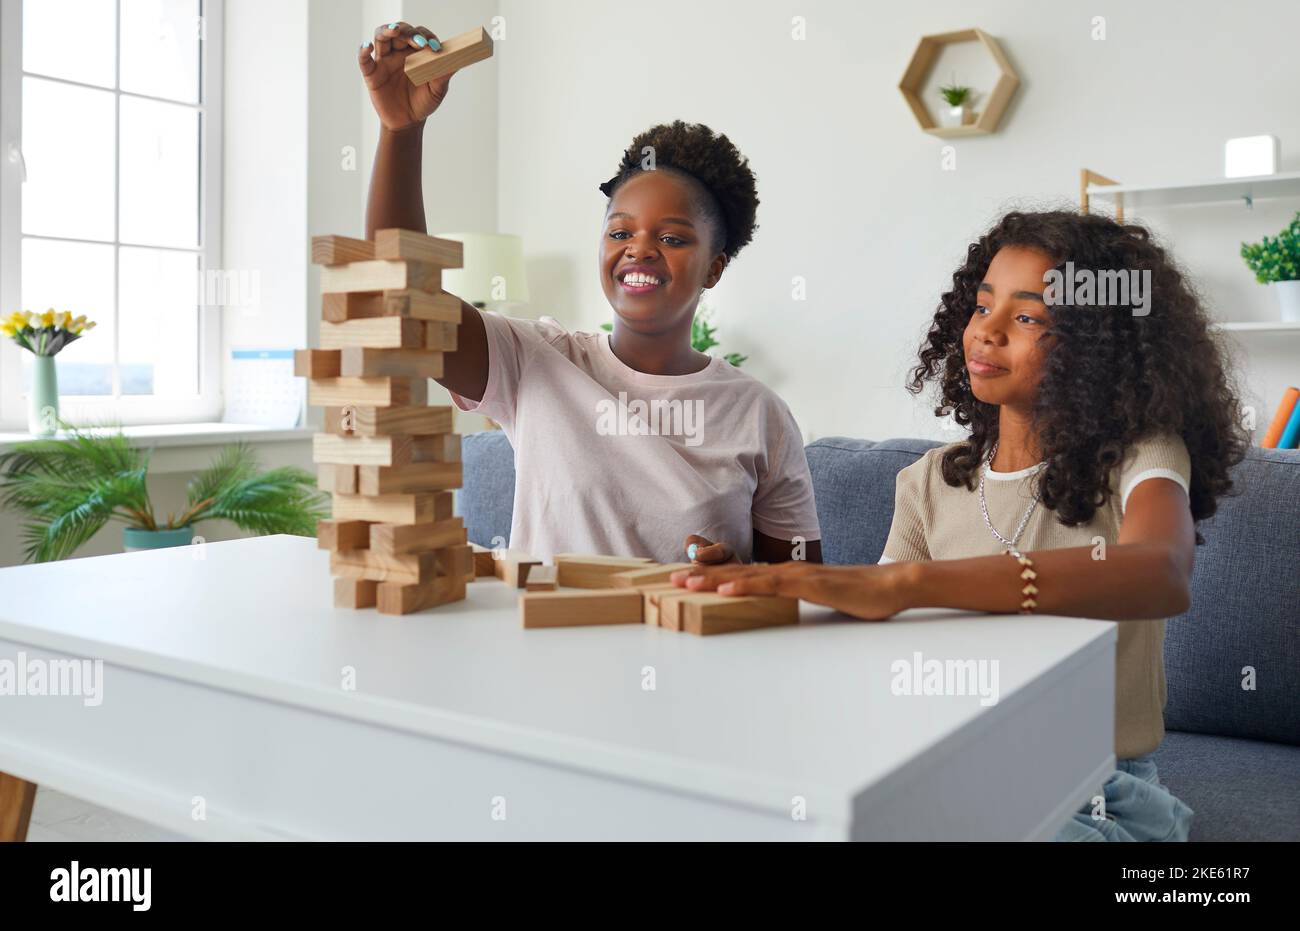 Laughing afroamerican woman psychologist playing tumbling tower with teen girl on therapy session. Stock Photo